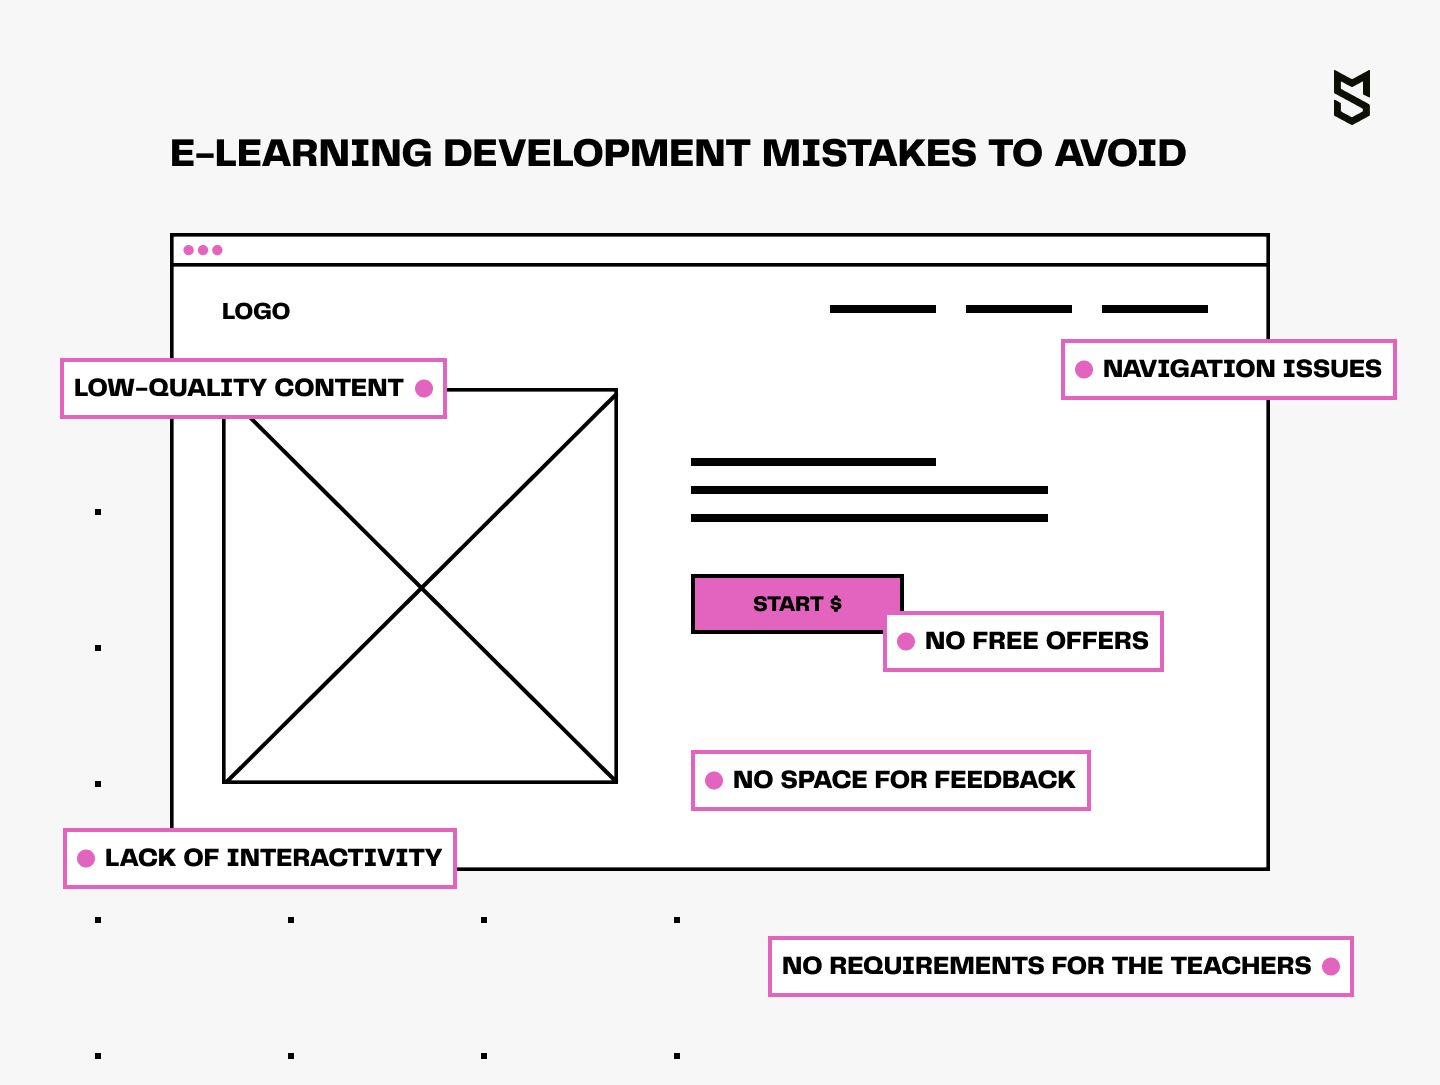 E-learning development mistakes to avoid